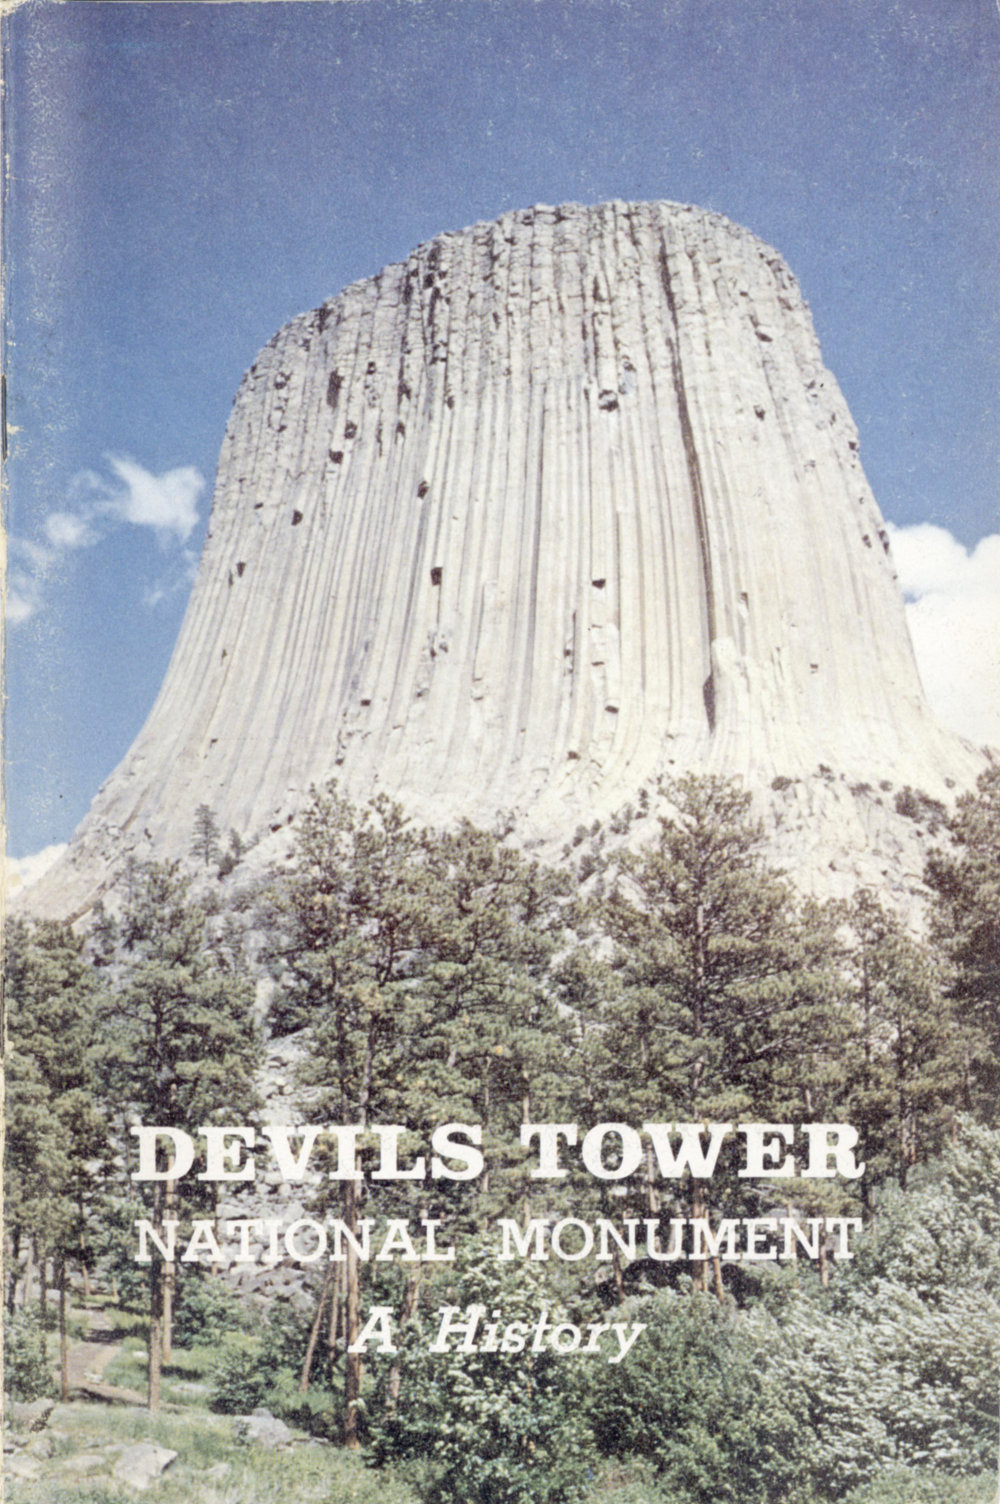 Devils Tower Lodge in Devils Tower, Wyoming - About Frank